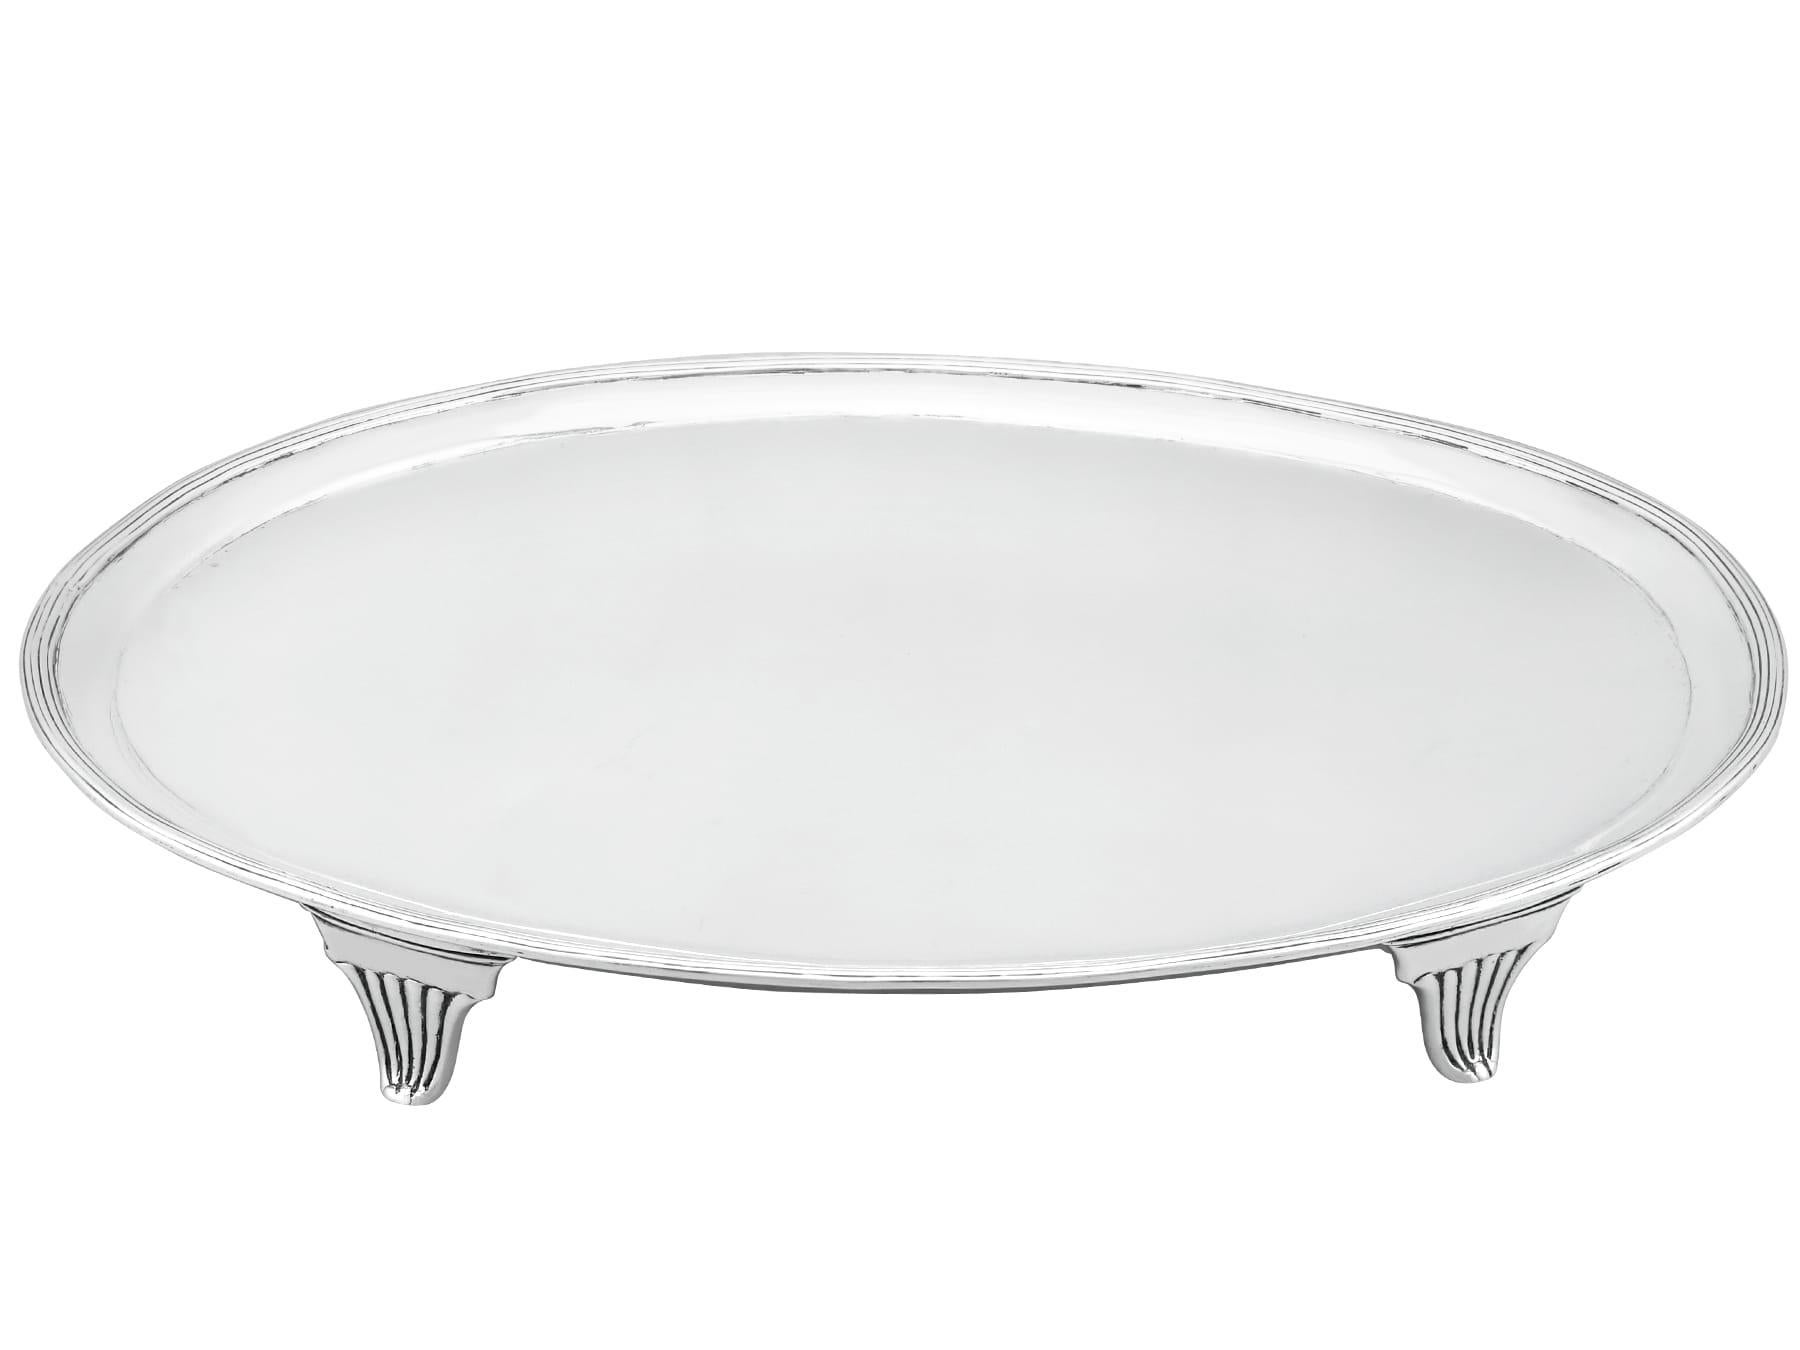 An exceptional, fine and impressive antique Georgian Newcastle English sterling silver salver; part of our antique George III dining collection.

This exceptional antique George III Newcastle sterling silver salver has a plain oval form onto four